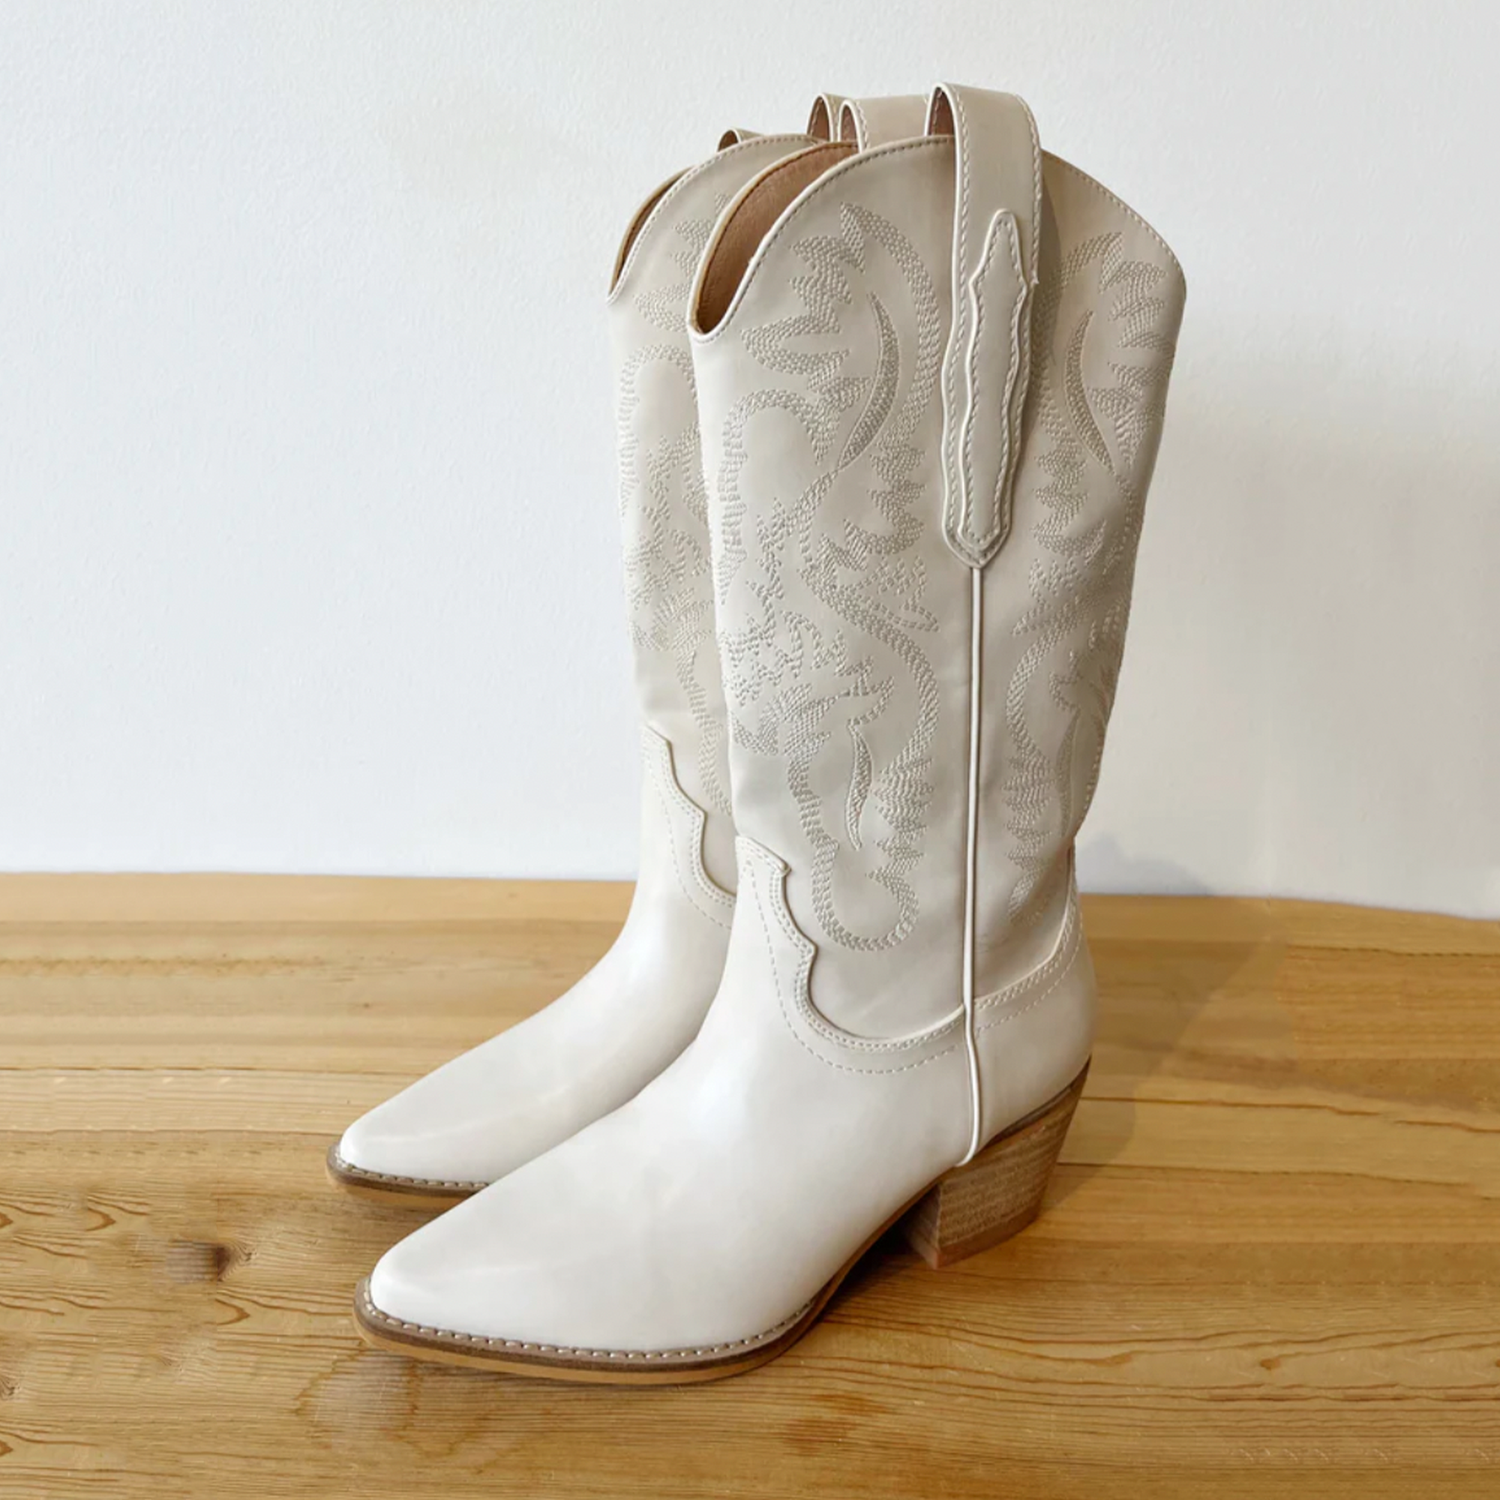 Cowboy Boot. Mid-calf high white cowboy boots. Pull-on styleCowboy Boot. An outlaw of the Wild West. This boot is perfect with a western silhouette and traditional snip. Fashioned with decorative stitching and pull straps, this low heeled boot is ready for any outfit